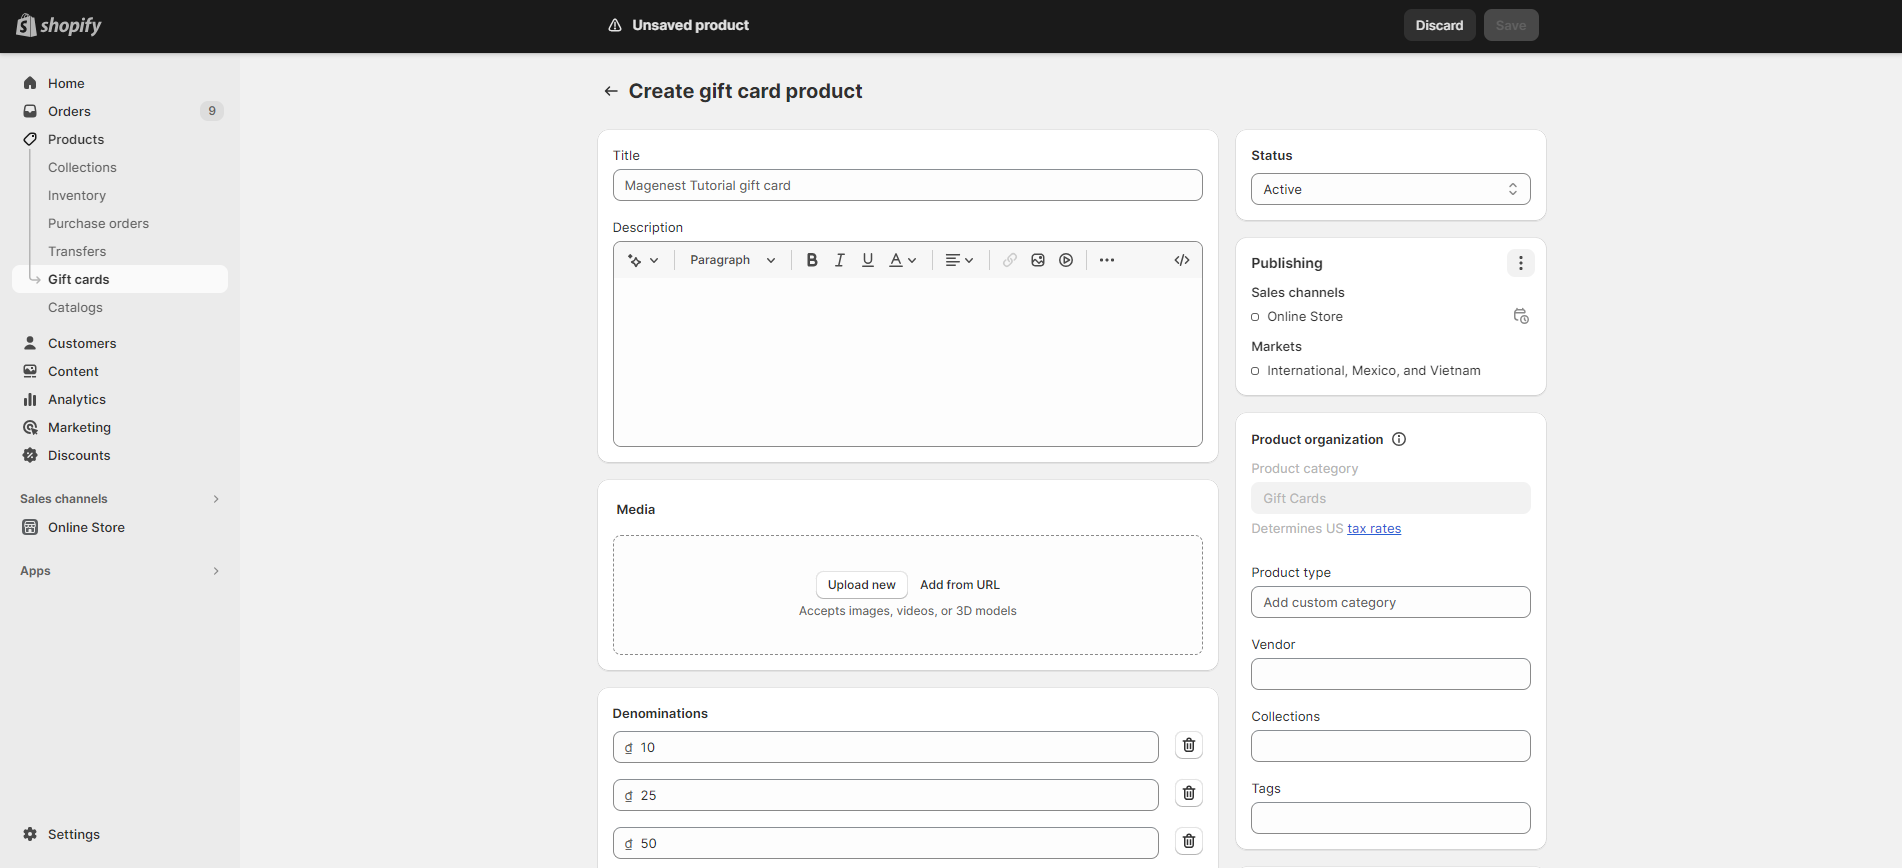 Step 2: Adding and Customizing Gift Card Options